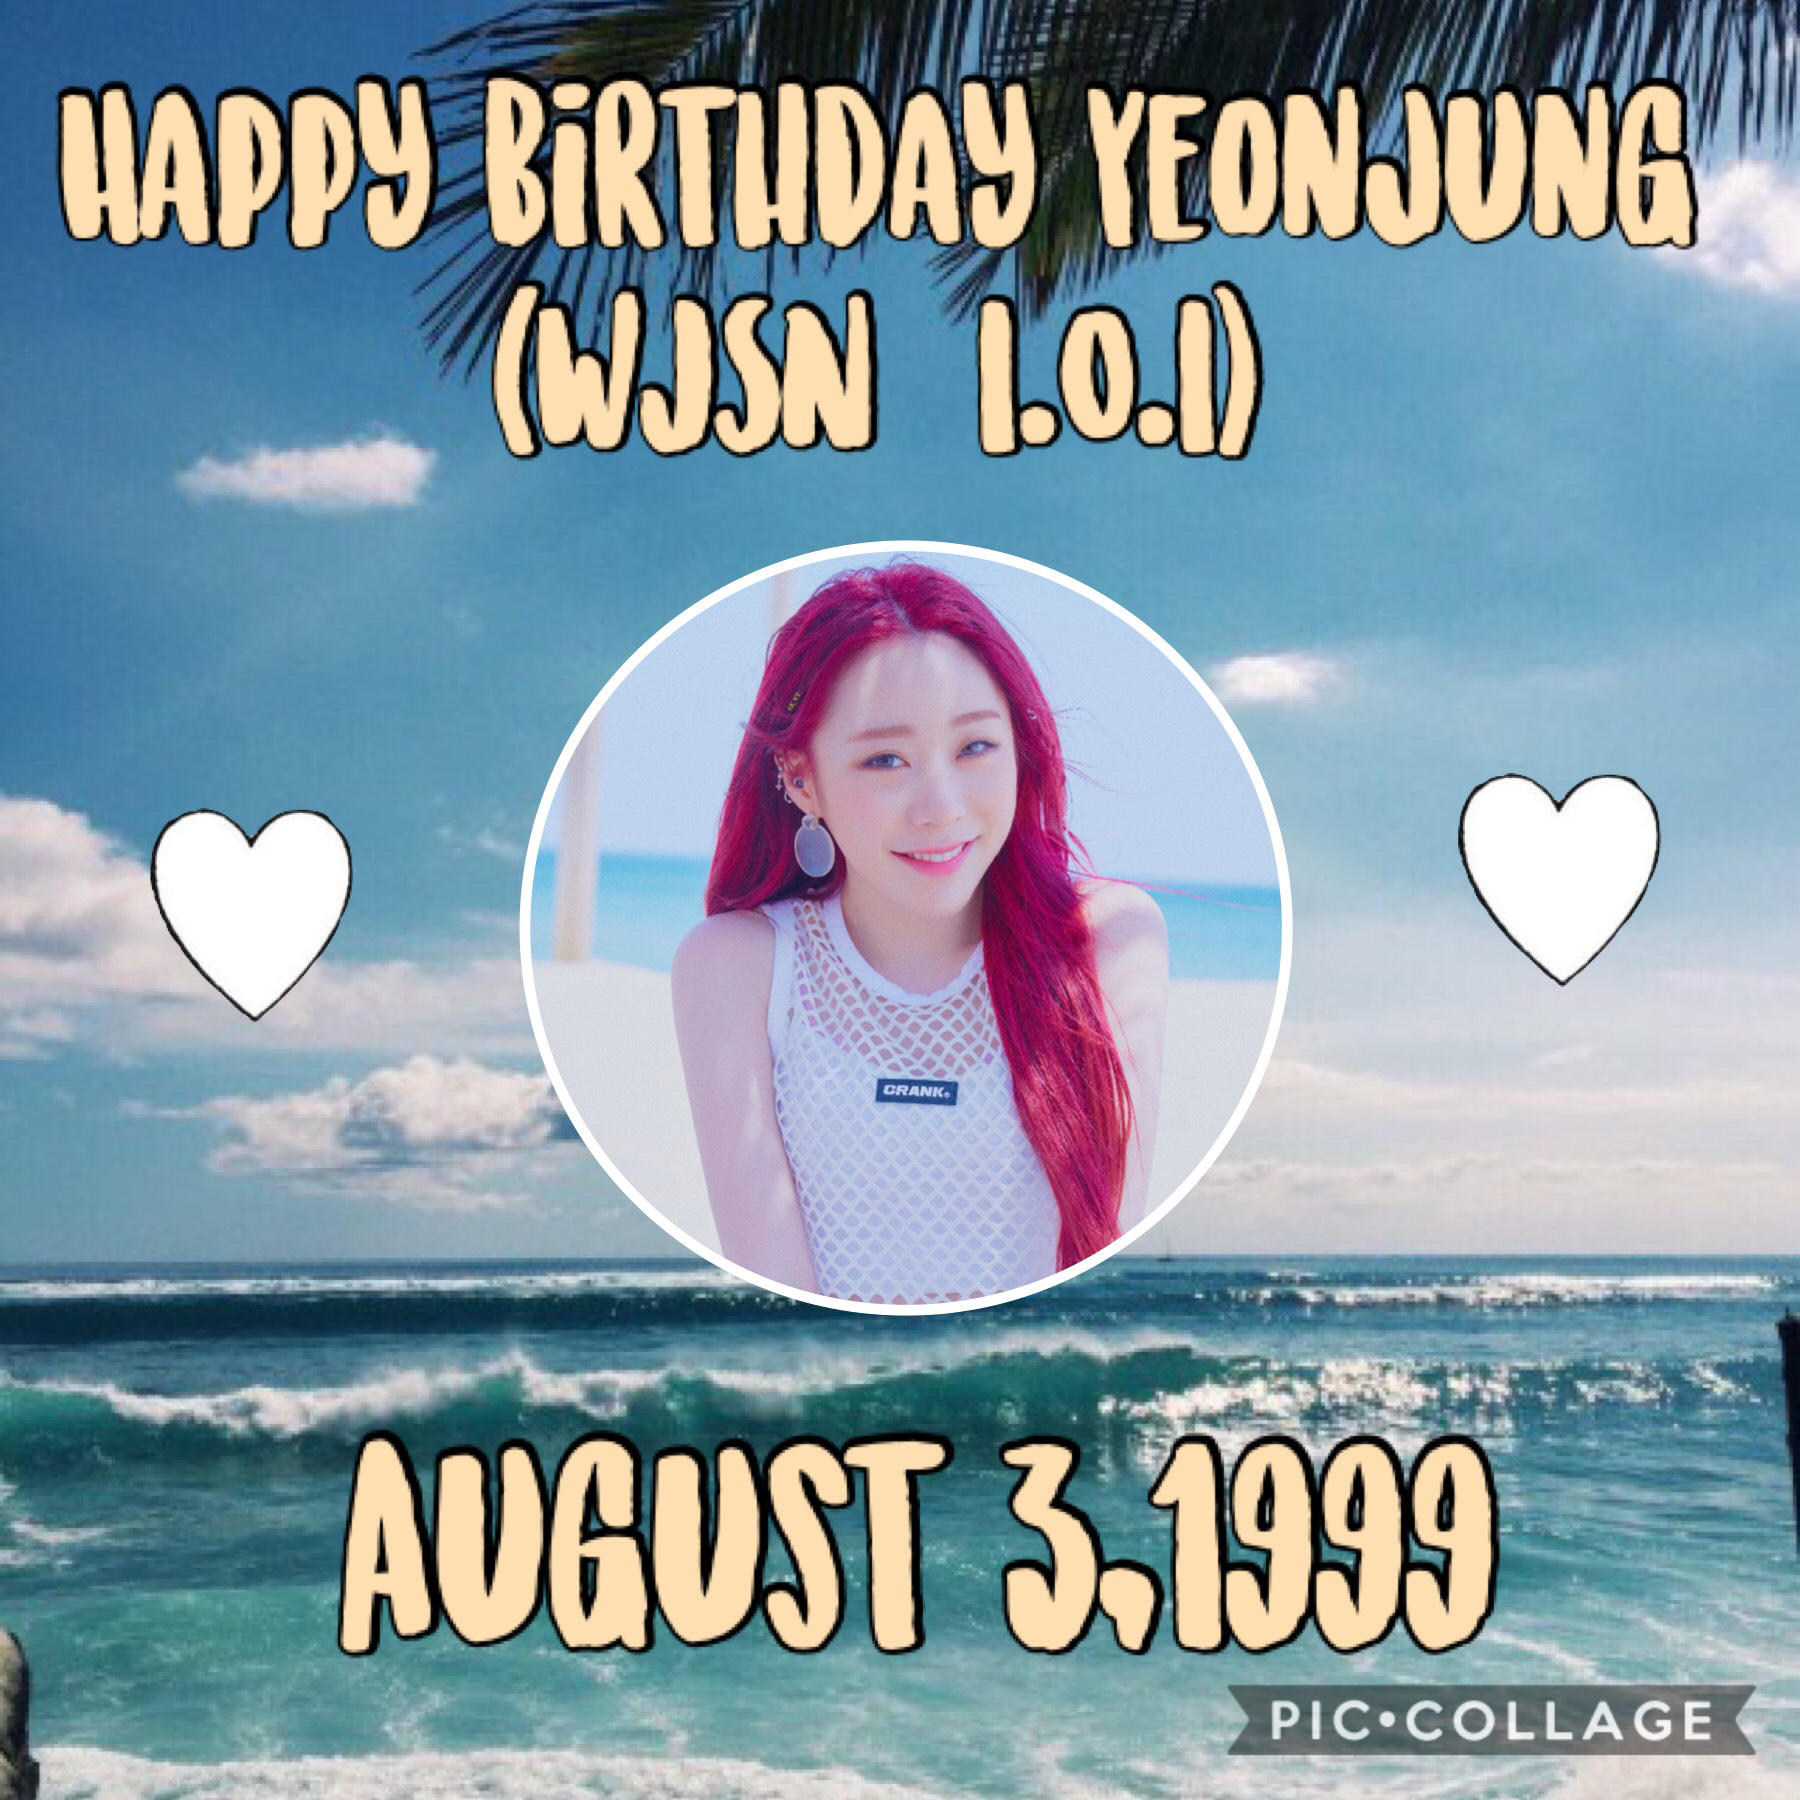 •Yoo Yeonjung•
We stan a vocal queen✊
*sigh* I miss i.o.i
Other birthdays:
•DAVICHI’s Minkyung~ August 3rd
•VERIVERY’s Dongheon~ August 4
🌴🍃🌴🍃Whoop🍃🌴🍃🌴